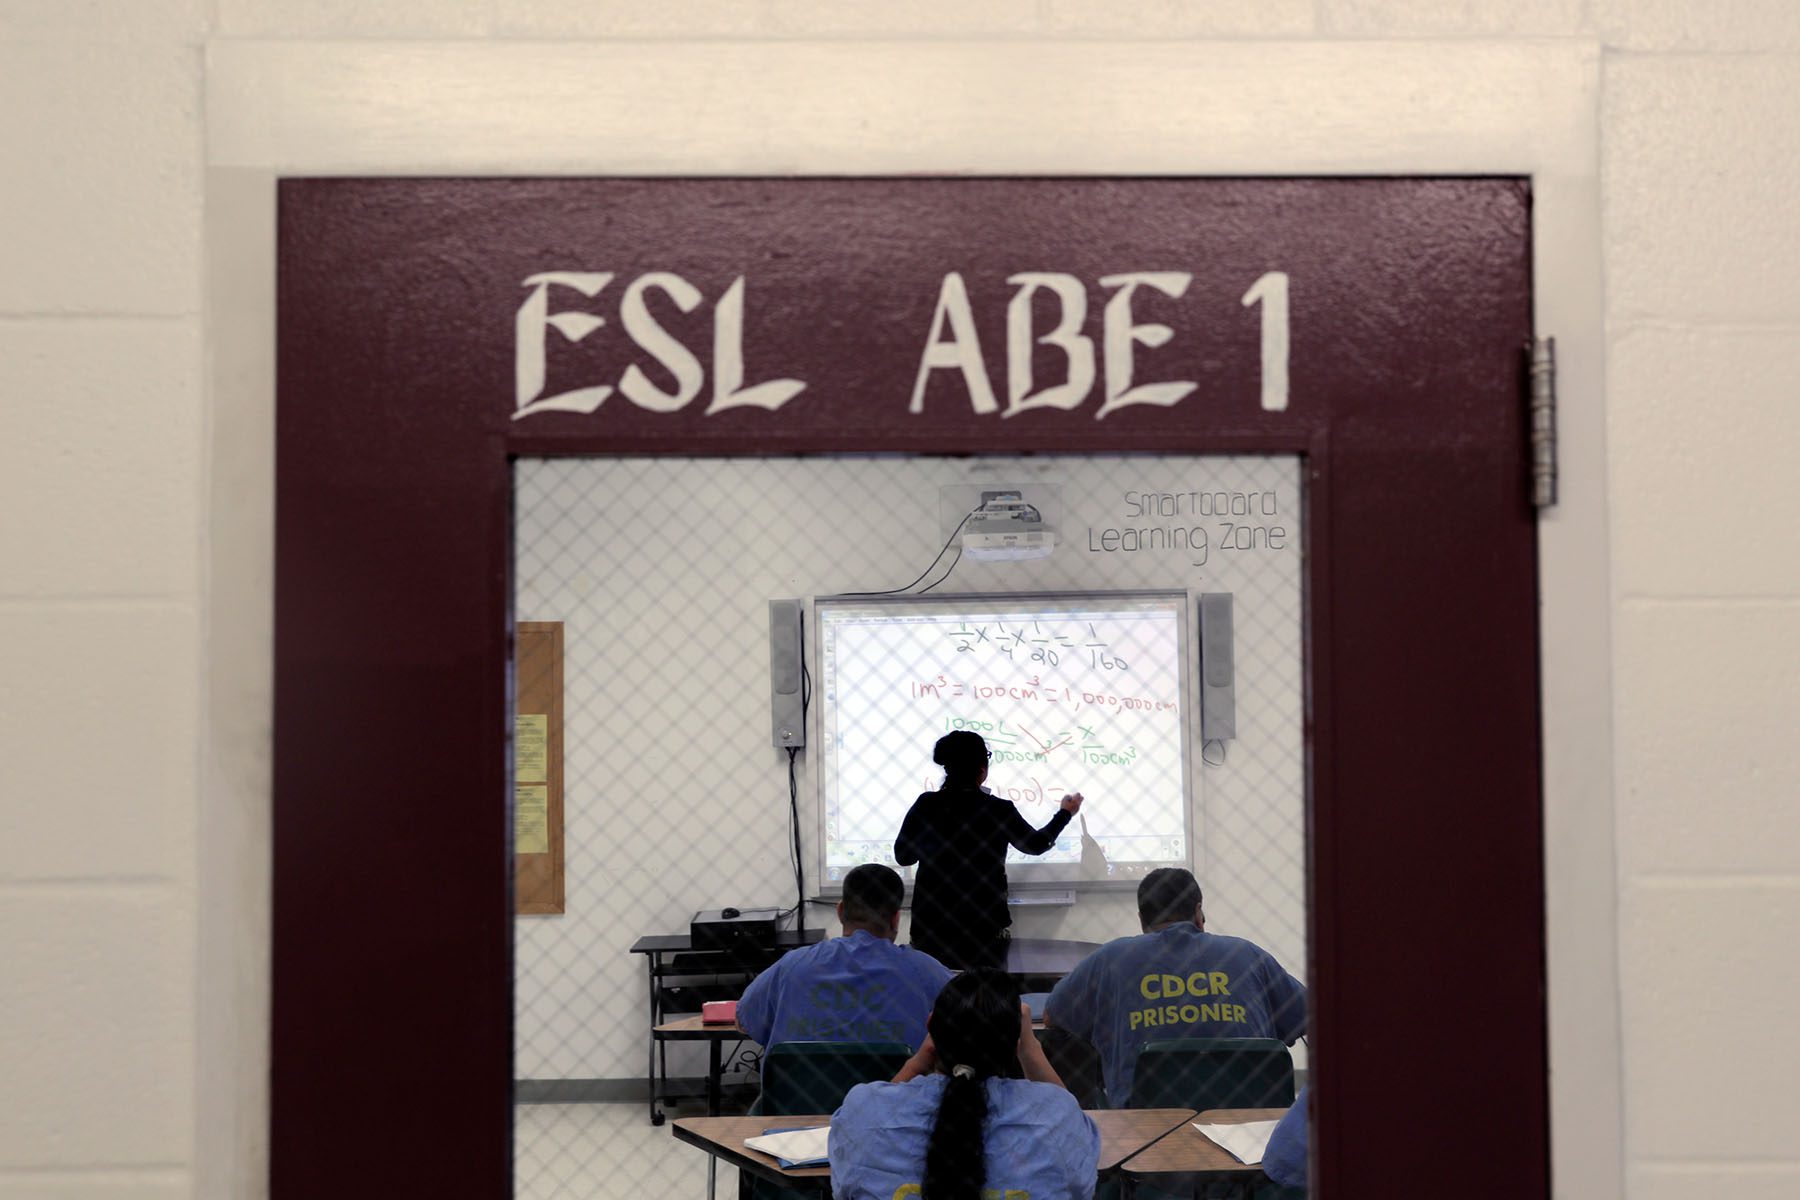 Prisoners are seen studying inside a class room. The teacher is resolving a math problem on the whiteboard. The door of the classroom reads "ESL ABE 1."